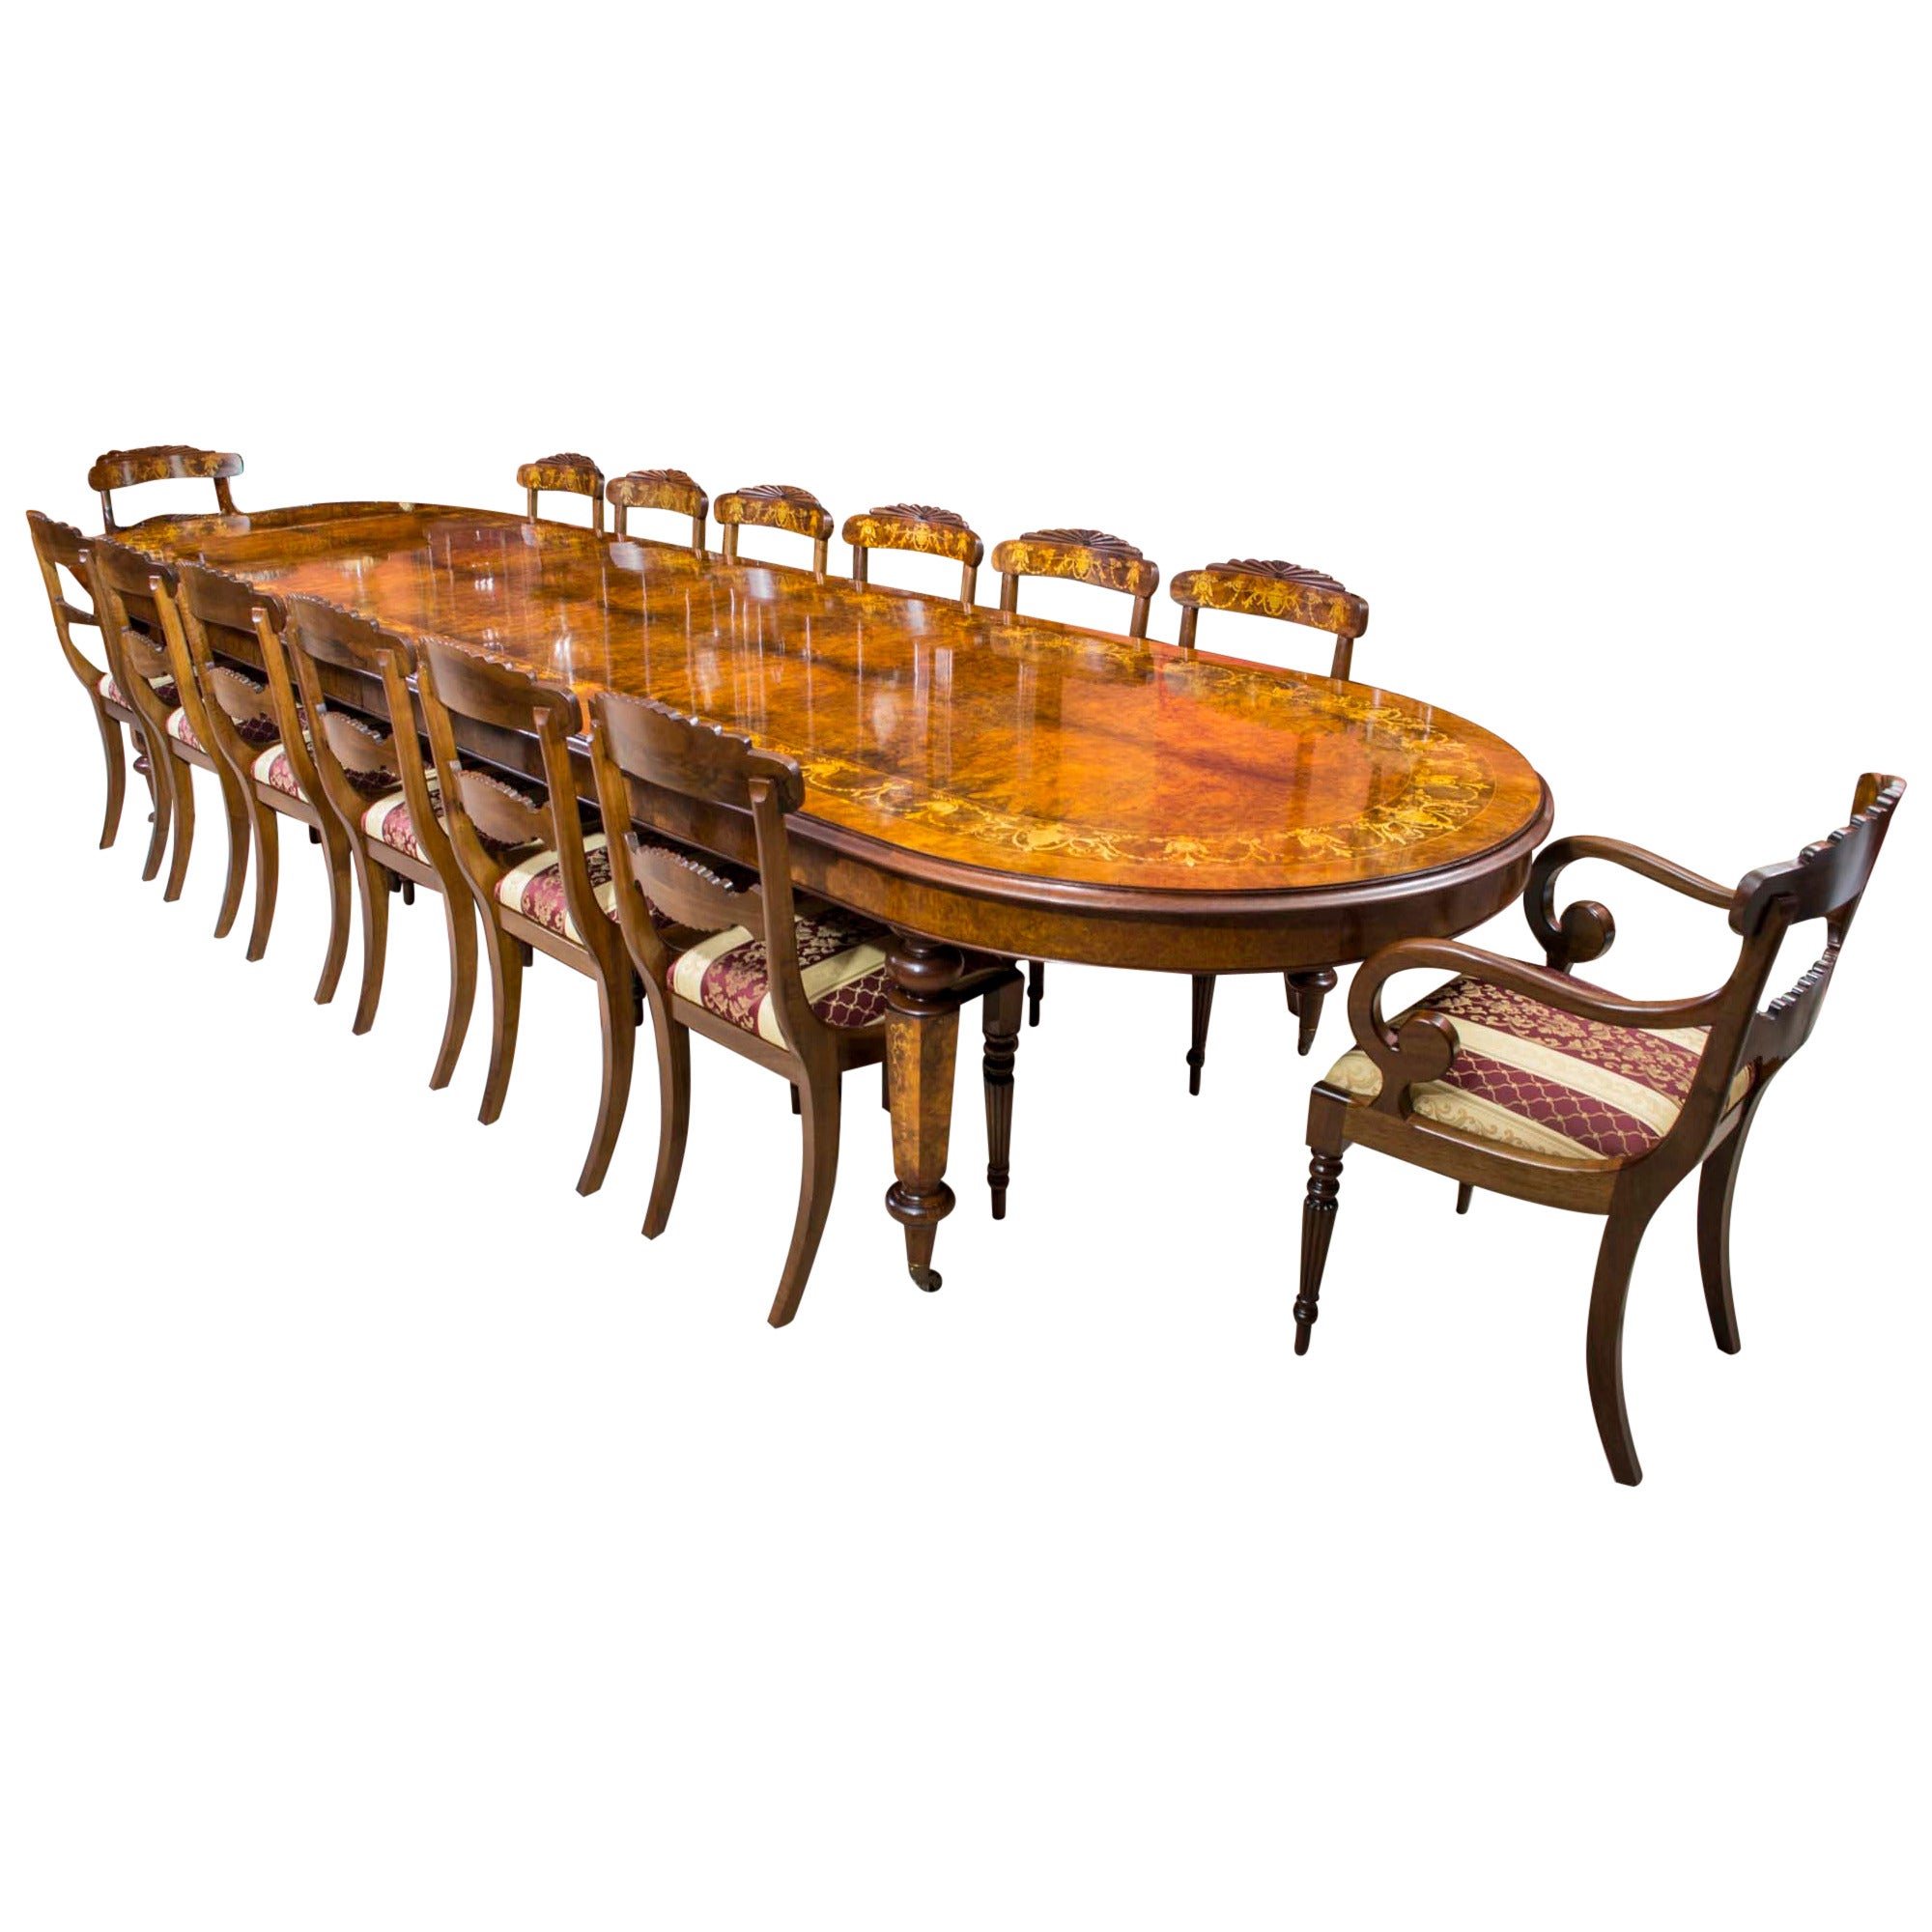 Vintage Burr Walnut Inlaid Dining Table with 14 Chairs